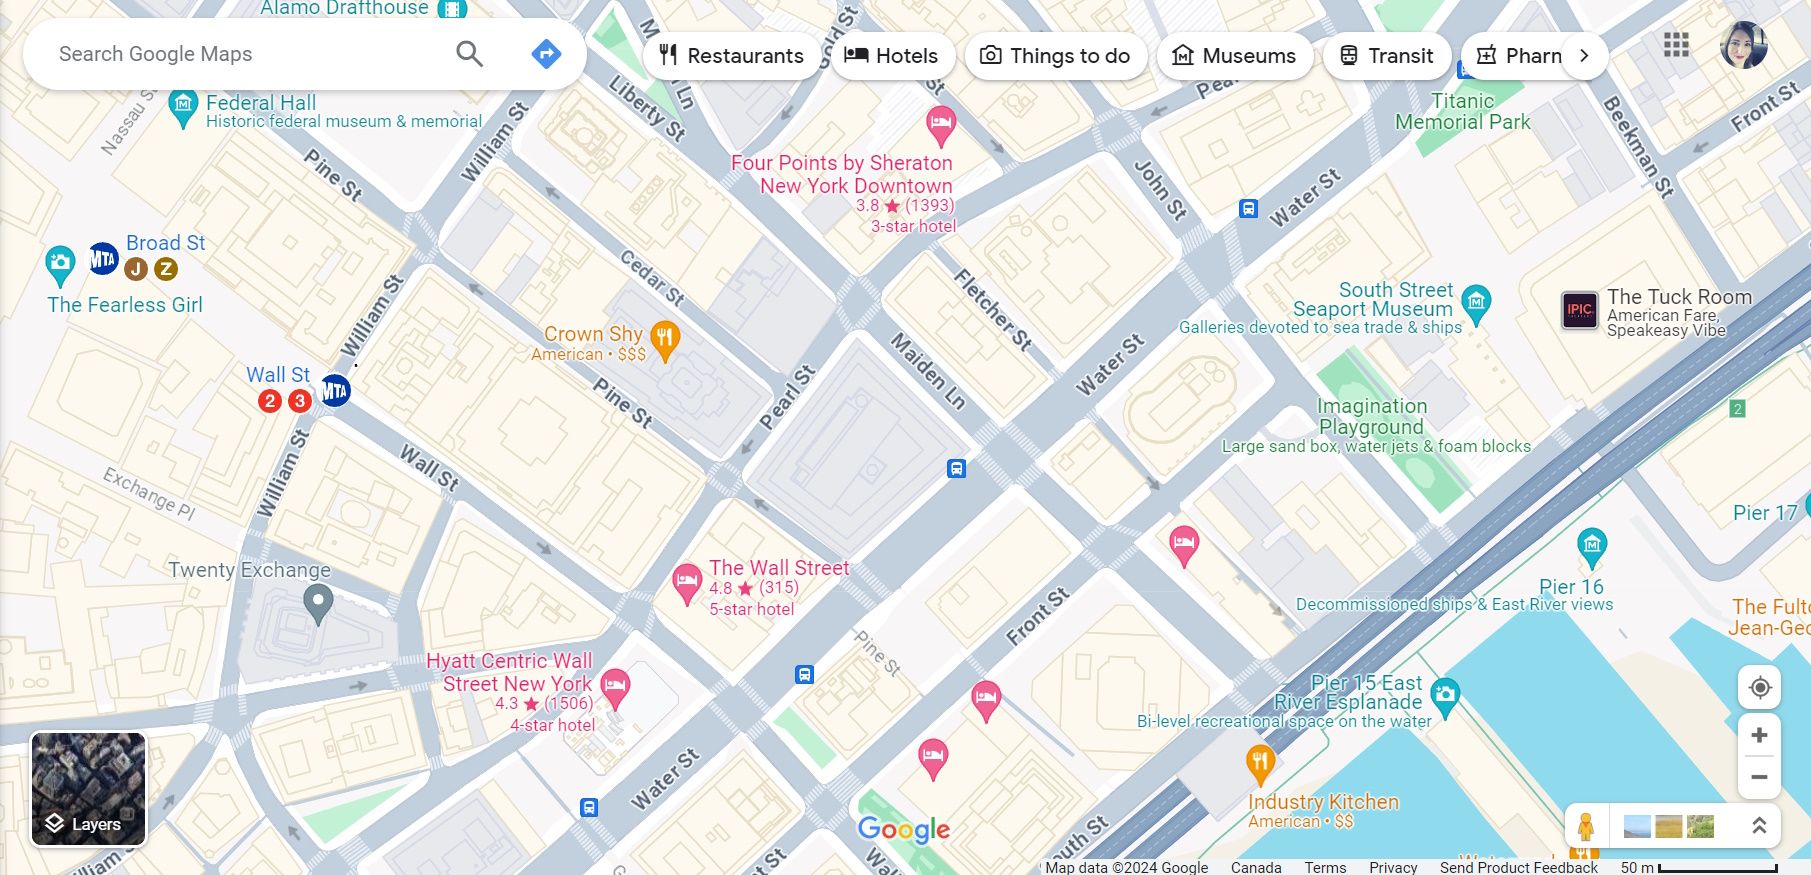 An unmarked location pin in Google Maps on the web